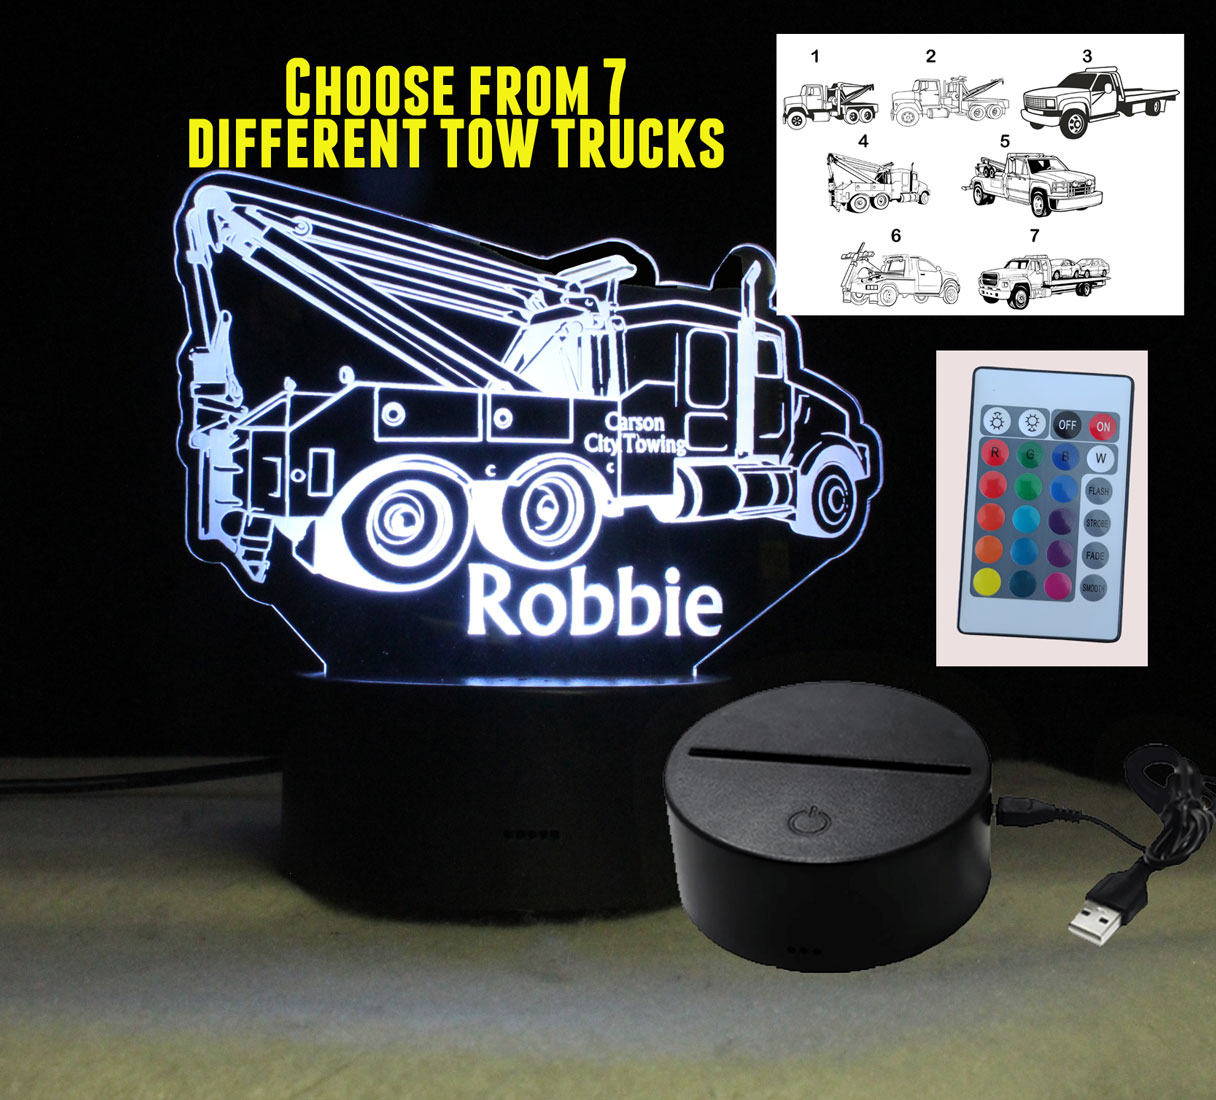 Customizable Personalized Tow Truck night light LED, USB/110V/240V battery operated